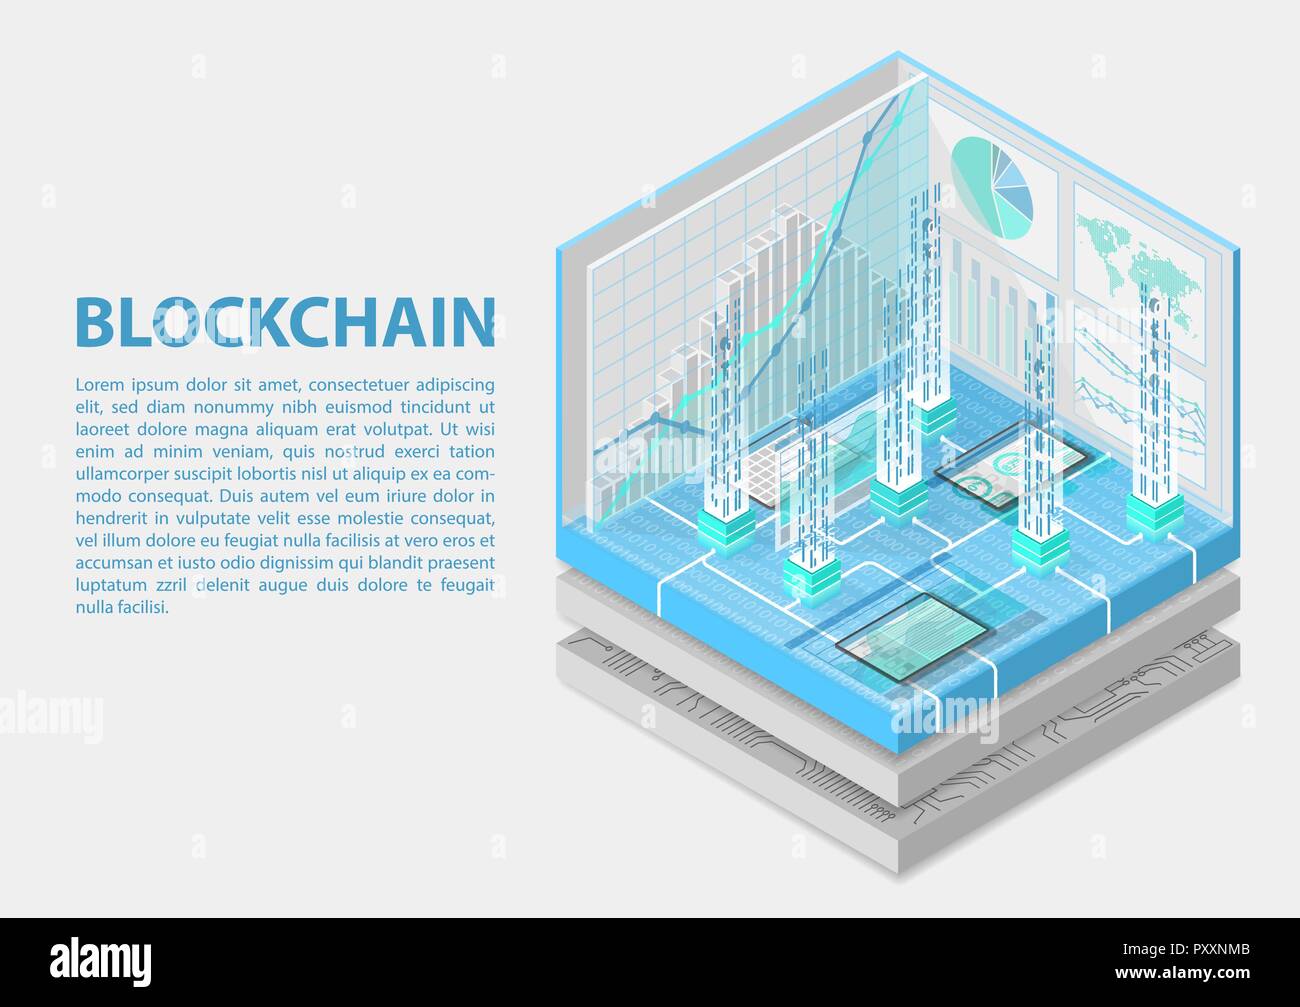 Blockchain isometric vector illustration. Abstract 3D infographic for blockchain related topics Stock Vector